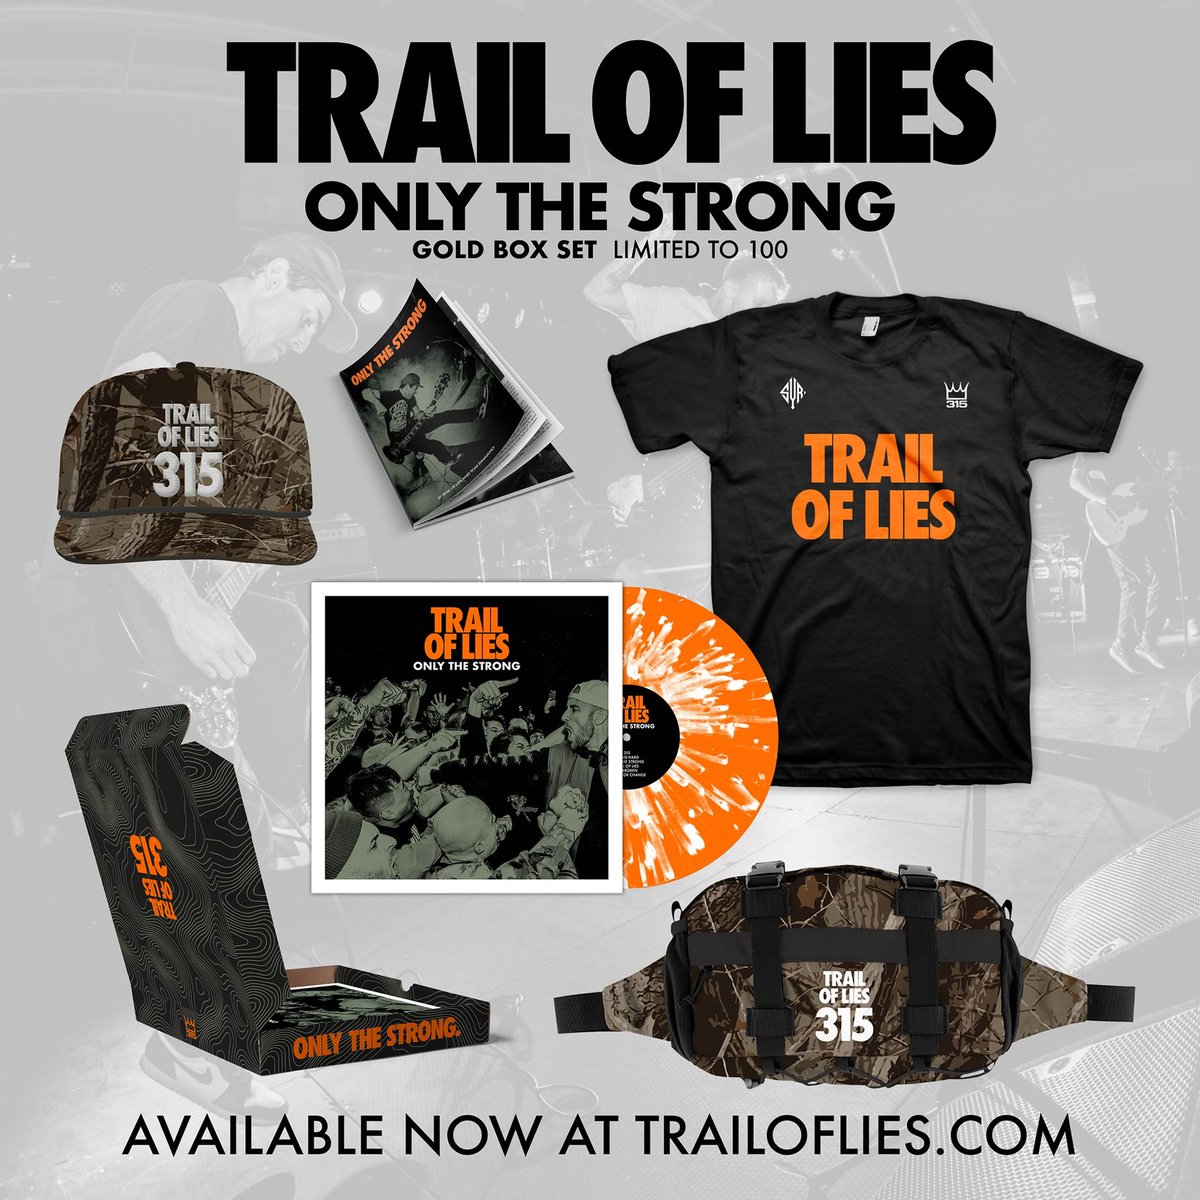 Trail Of Lies “Only The Strong” LP Pre-Orders are now up on our website. Listen to the first single “Only The Strong” on all streaming platforms. trailoflies.com